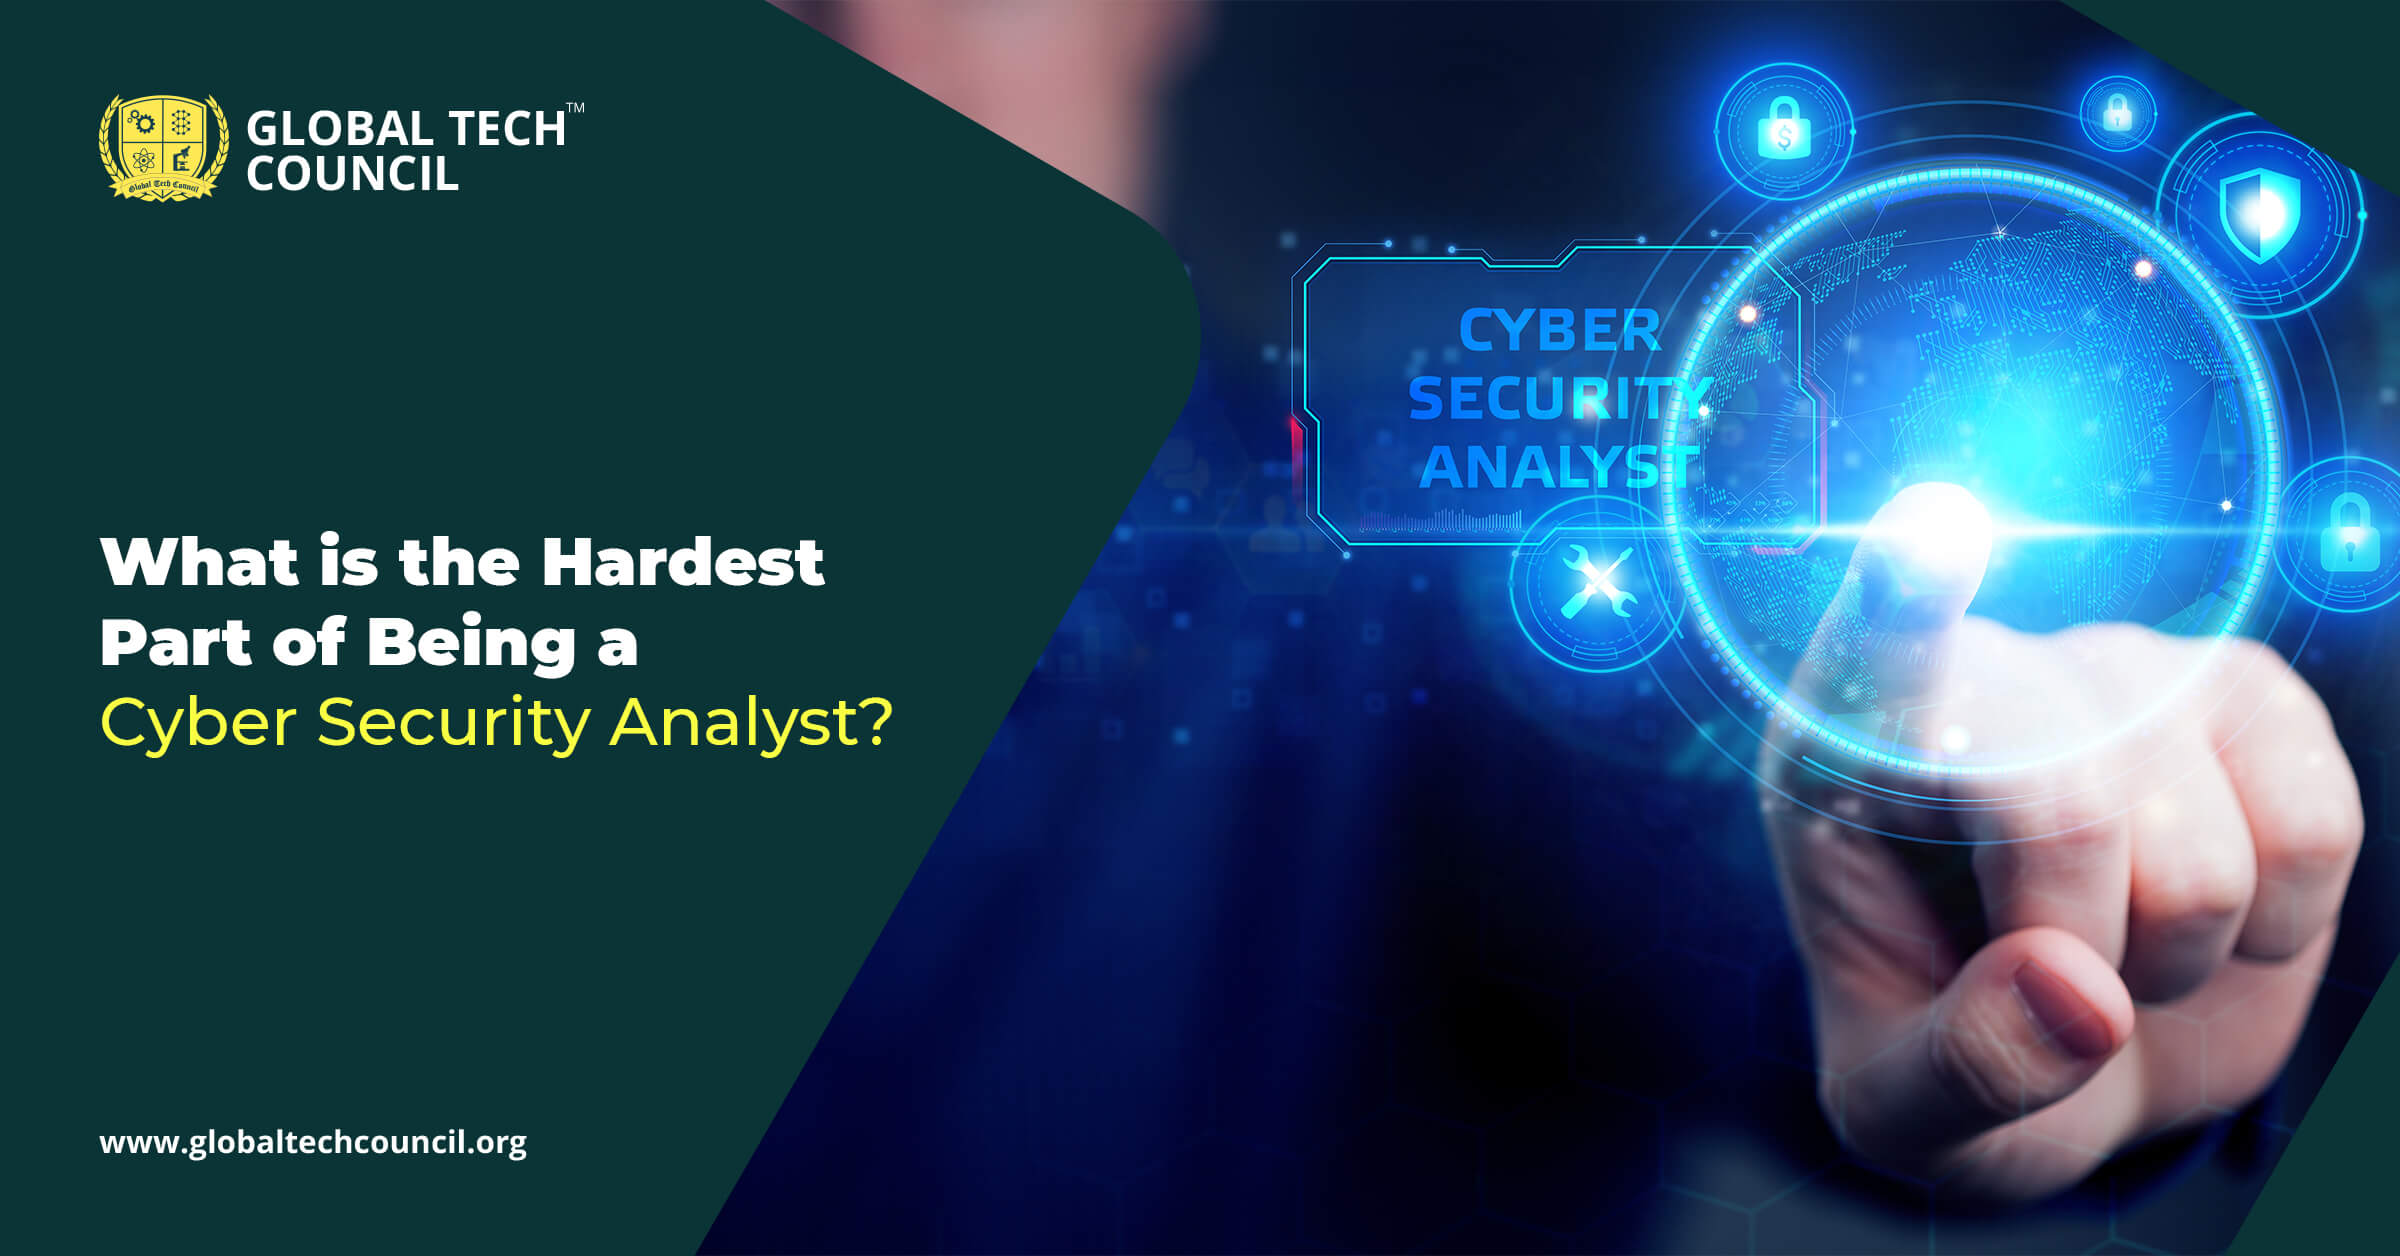 What is the Hardest Part of Being a Cyber Security Analyst